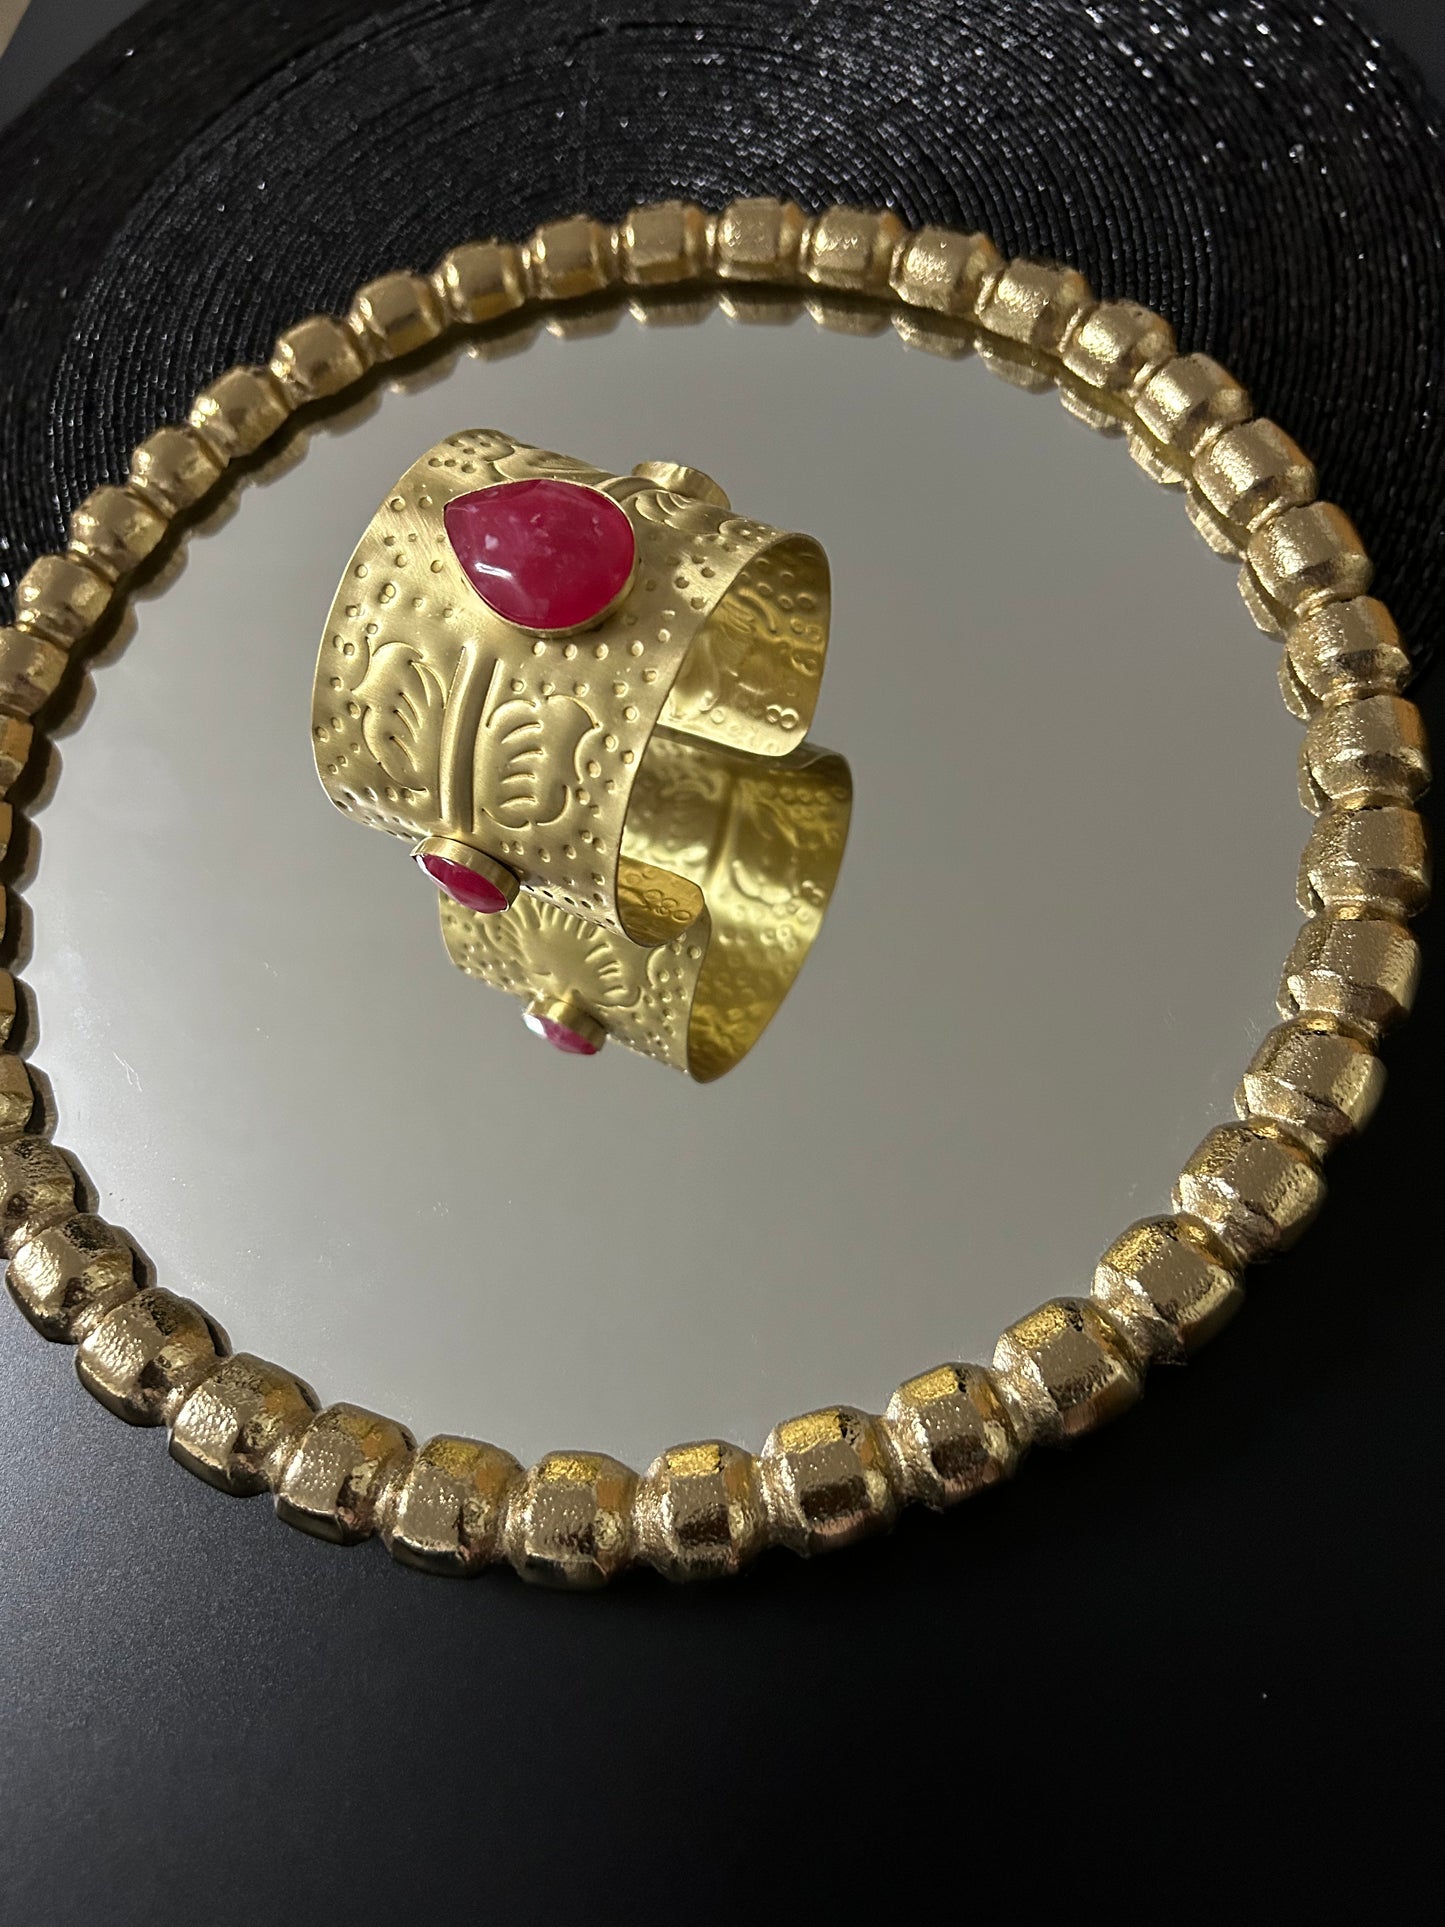 Brass bracelet with pink faux stones